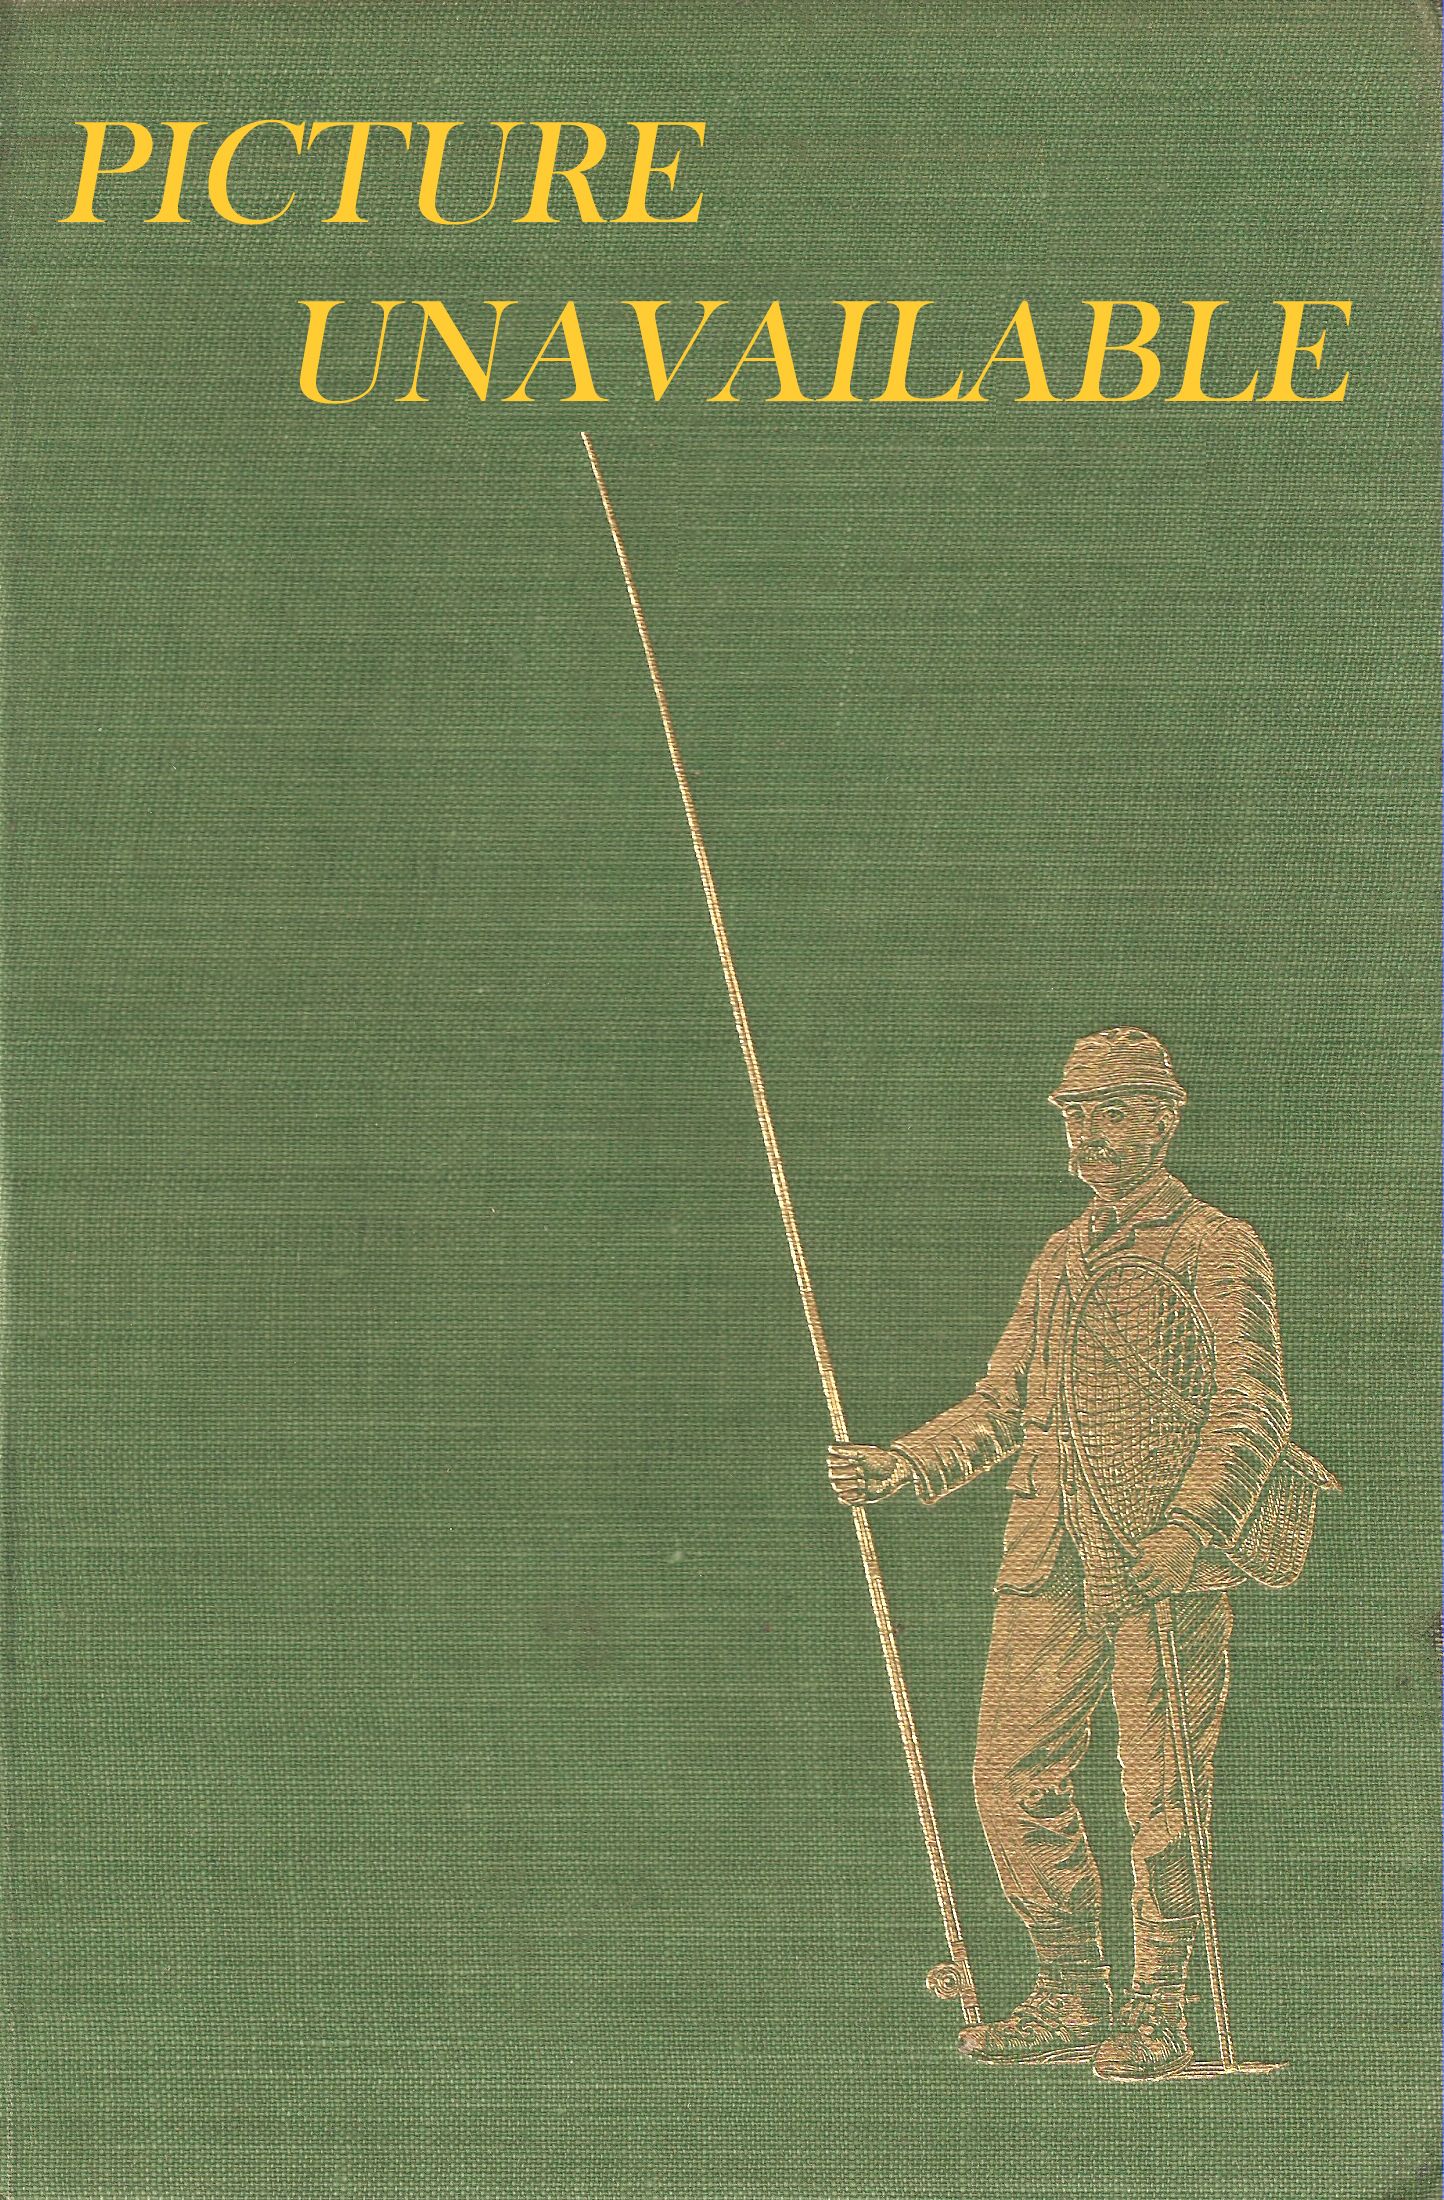 THE BOOK OF THE DRY FLY. By George A.B. Dewar. New edition, with  contributions by The Duke of Rutland and J.E. Booth.